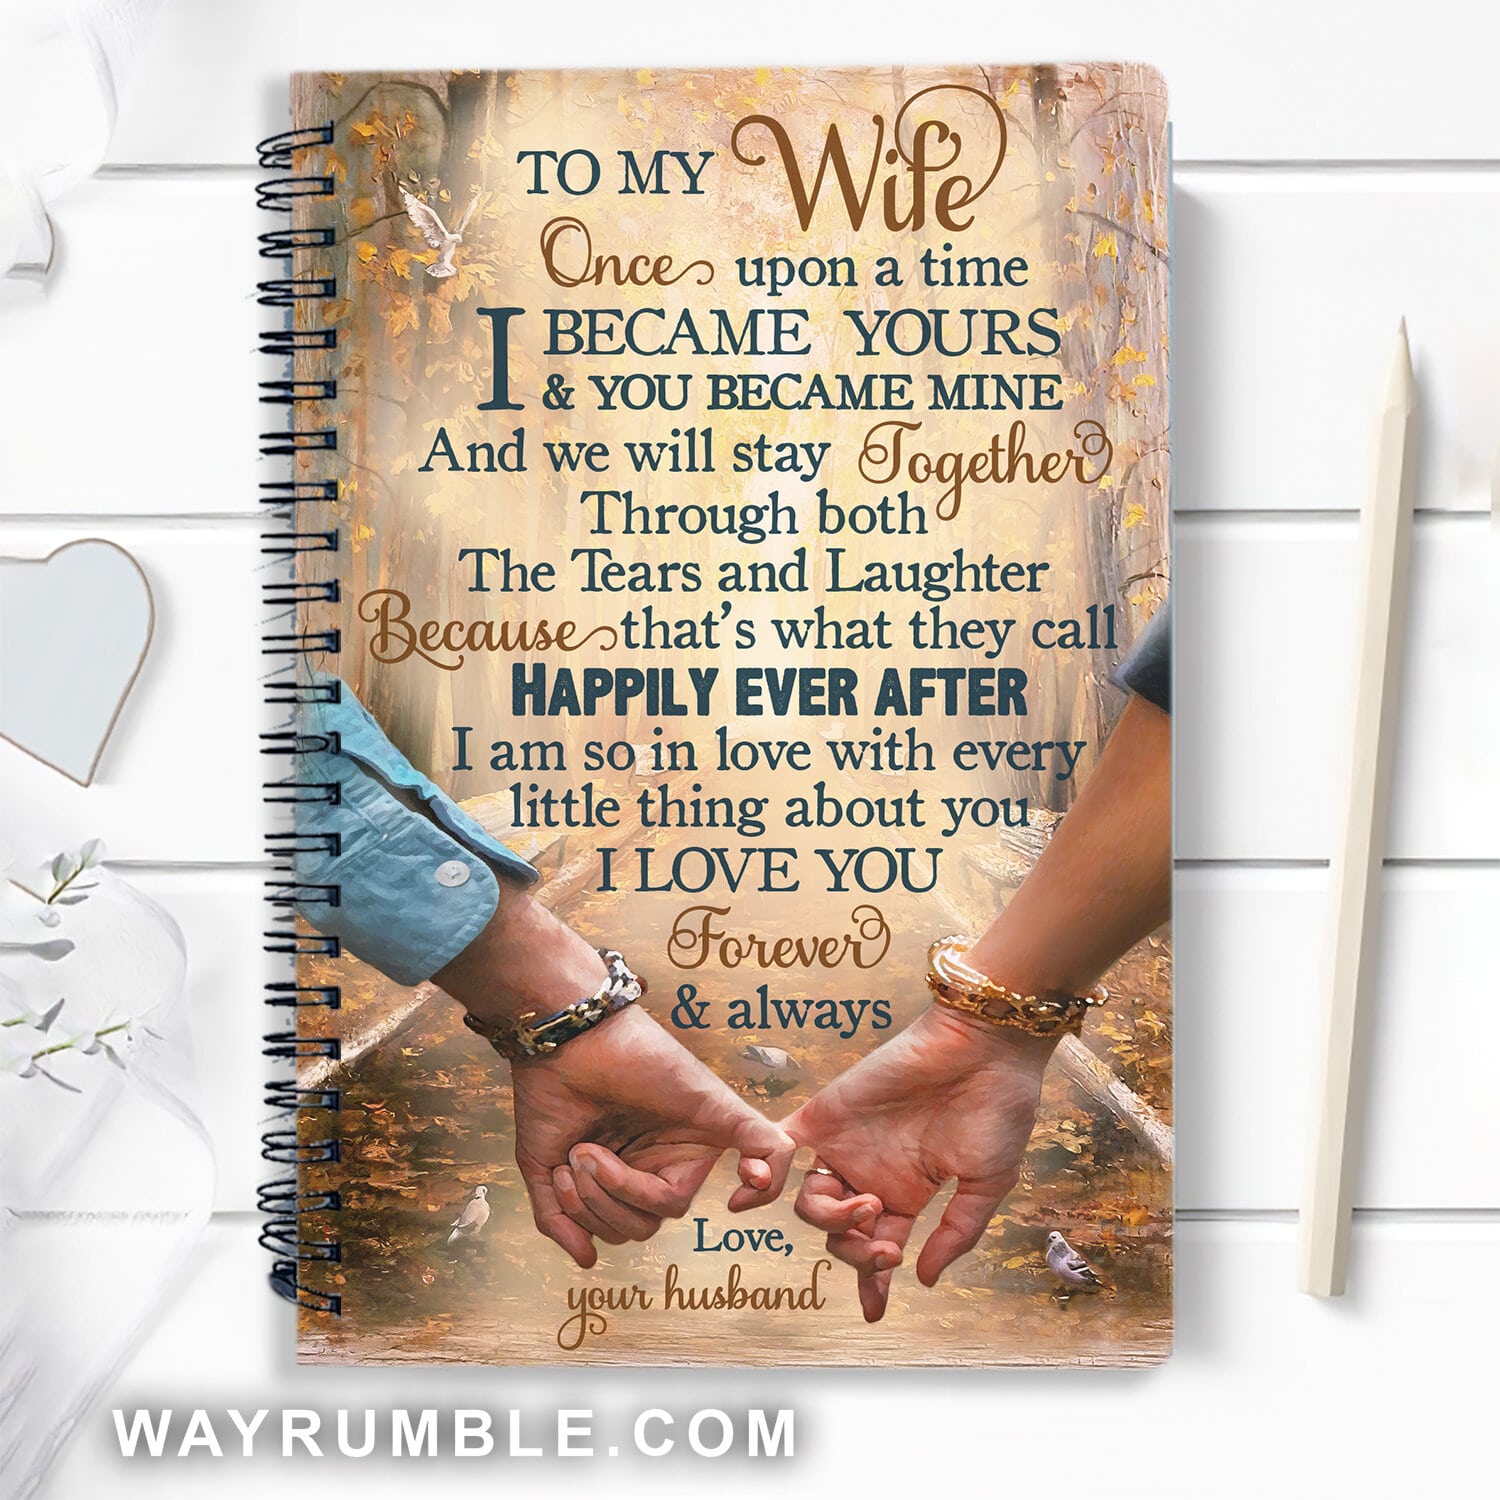 To my wife - Holding hands in the forest - I love you forever and always - Spiral Journal